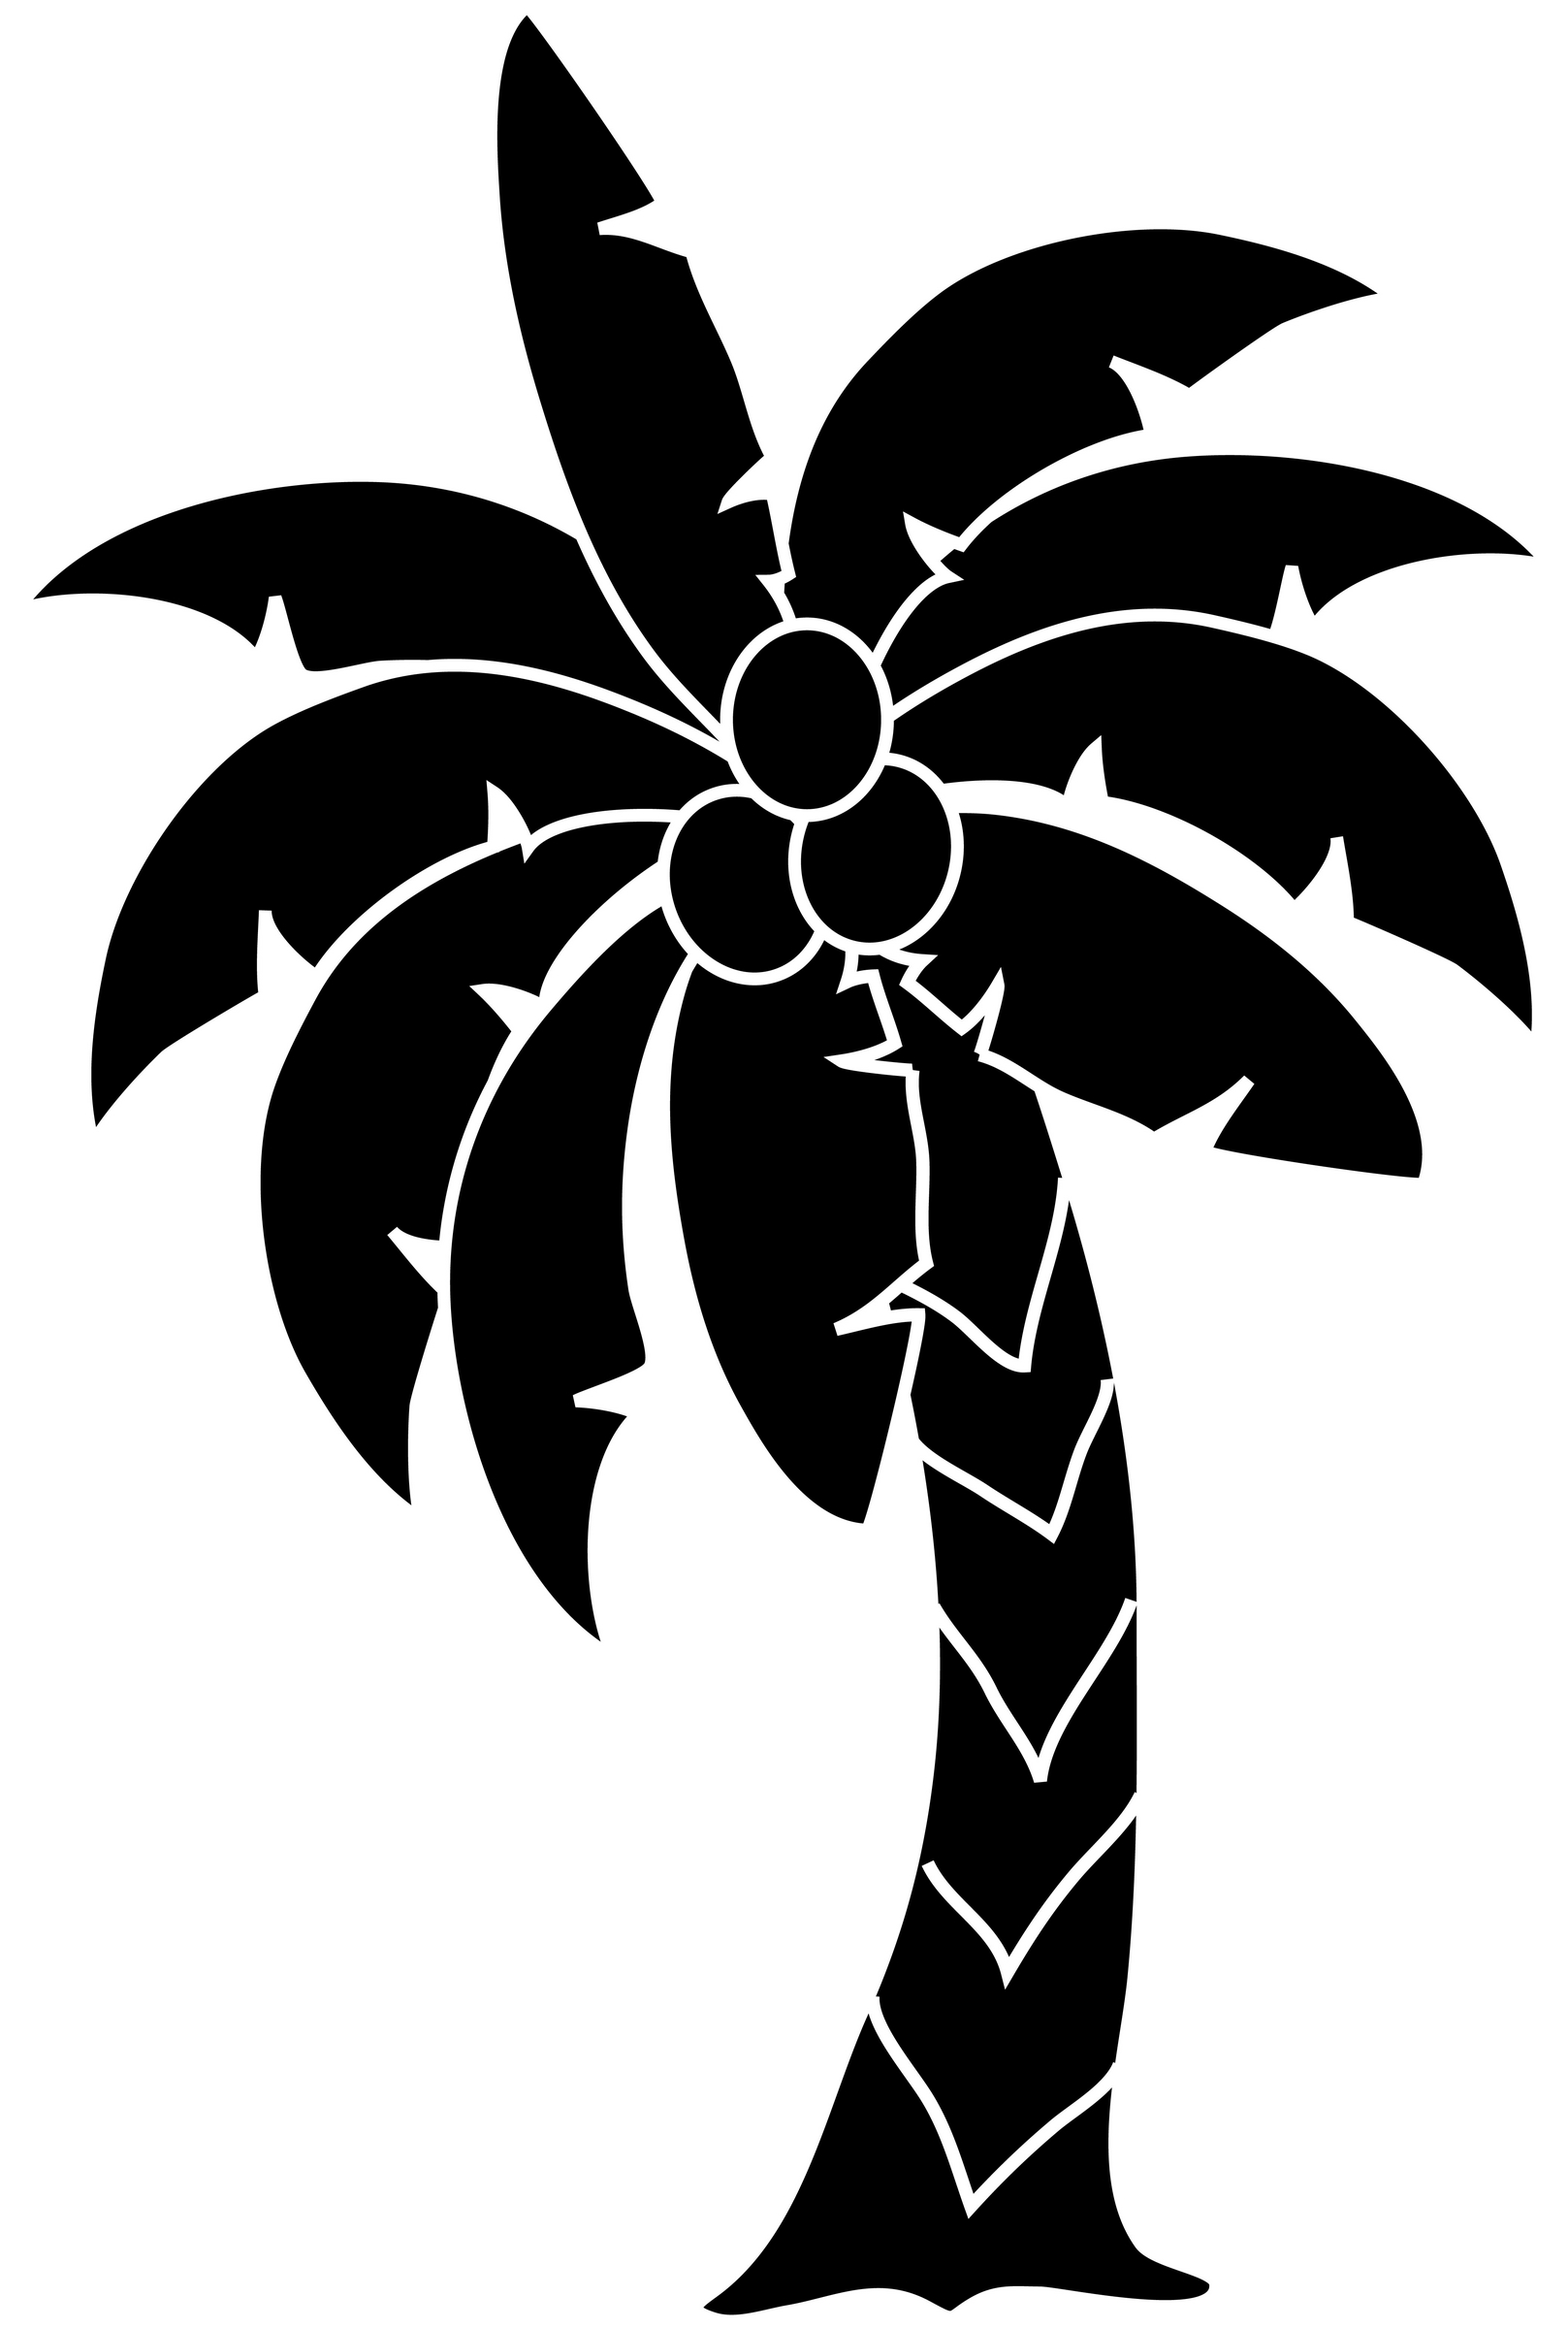 Palm tree clipart tropical black and white - WikiClipArt